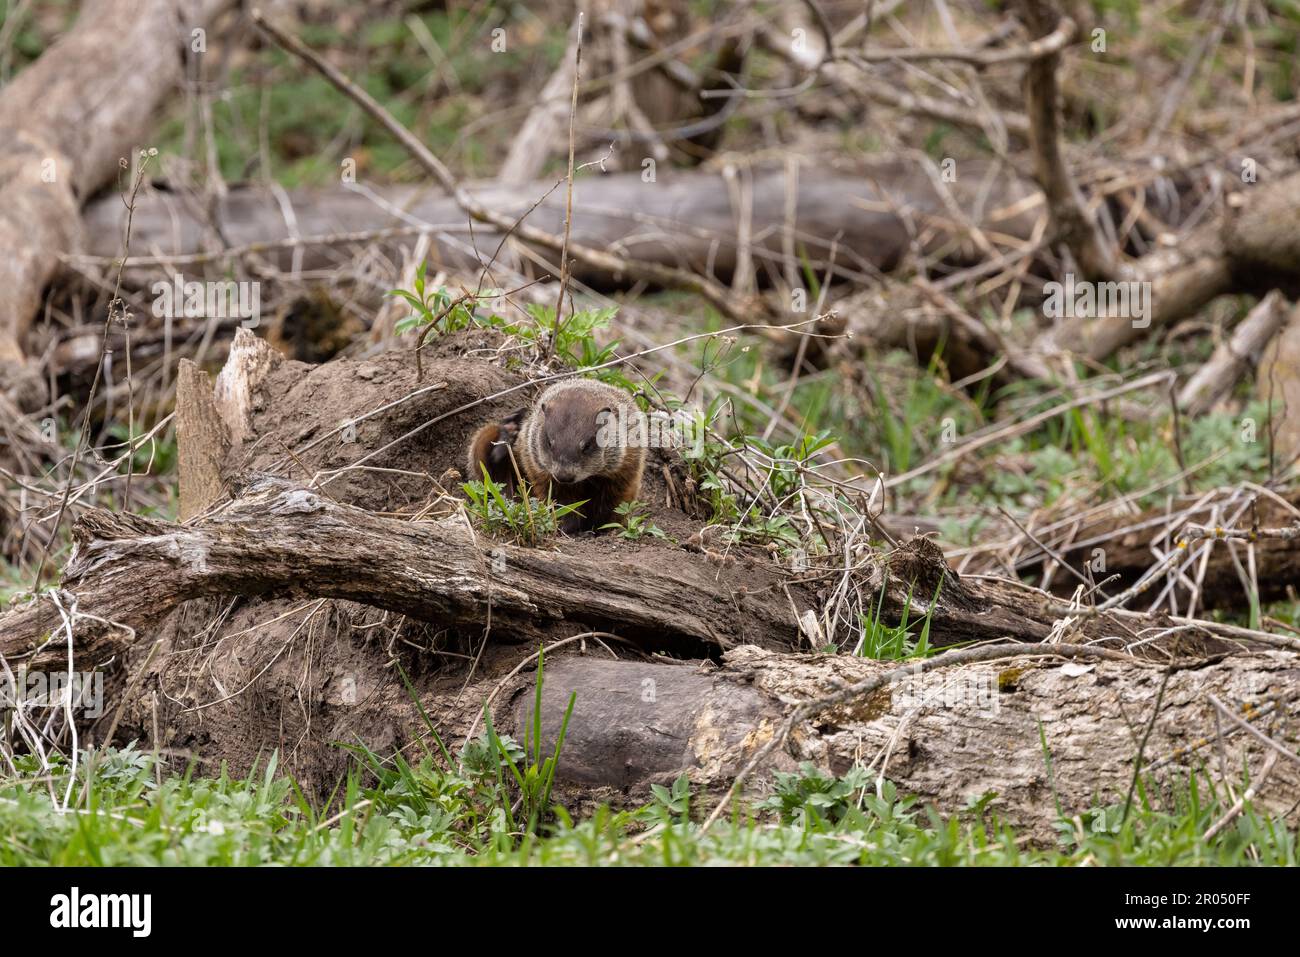 A woodchuck on a down tree in the woods during spring. Stock Photo